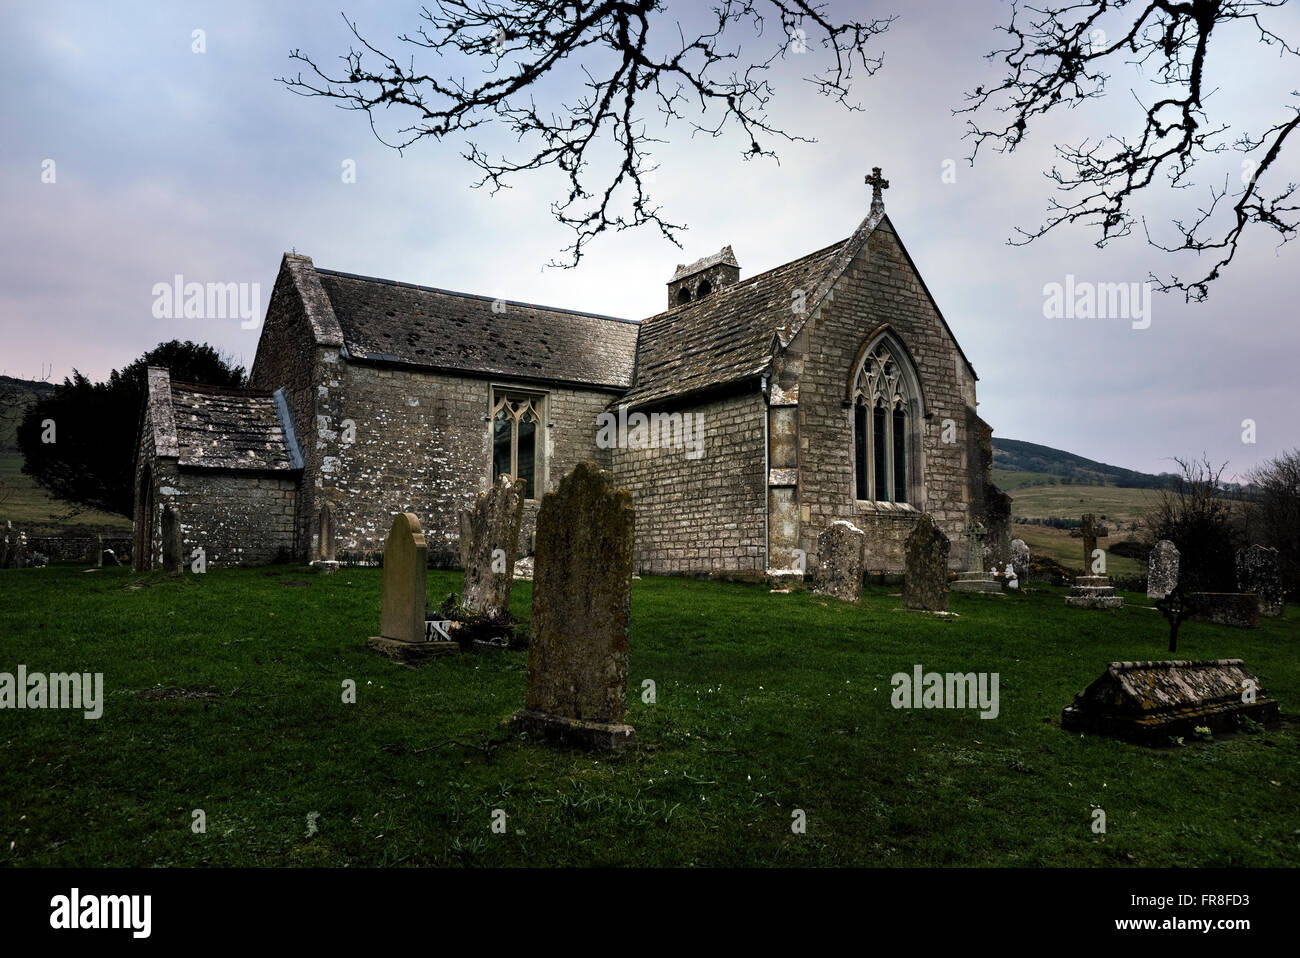 Tyneham, St Mary's Church, Purbeck, Dorset, England, UK Banque D'Images